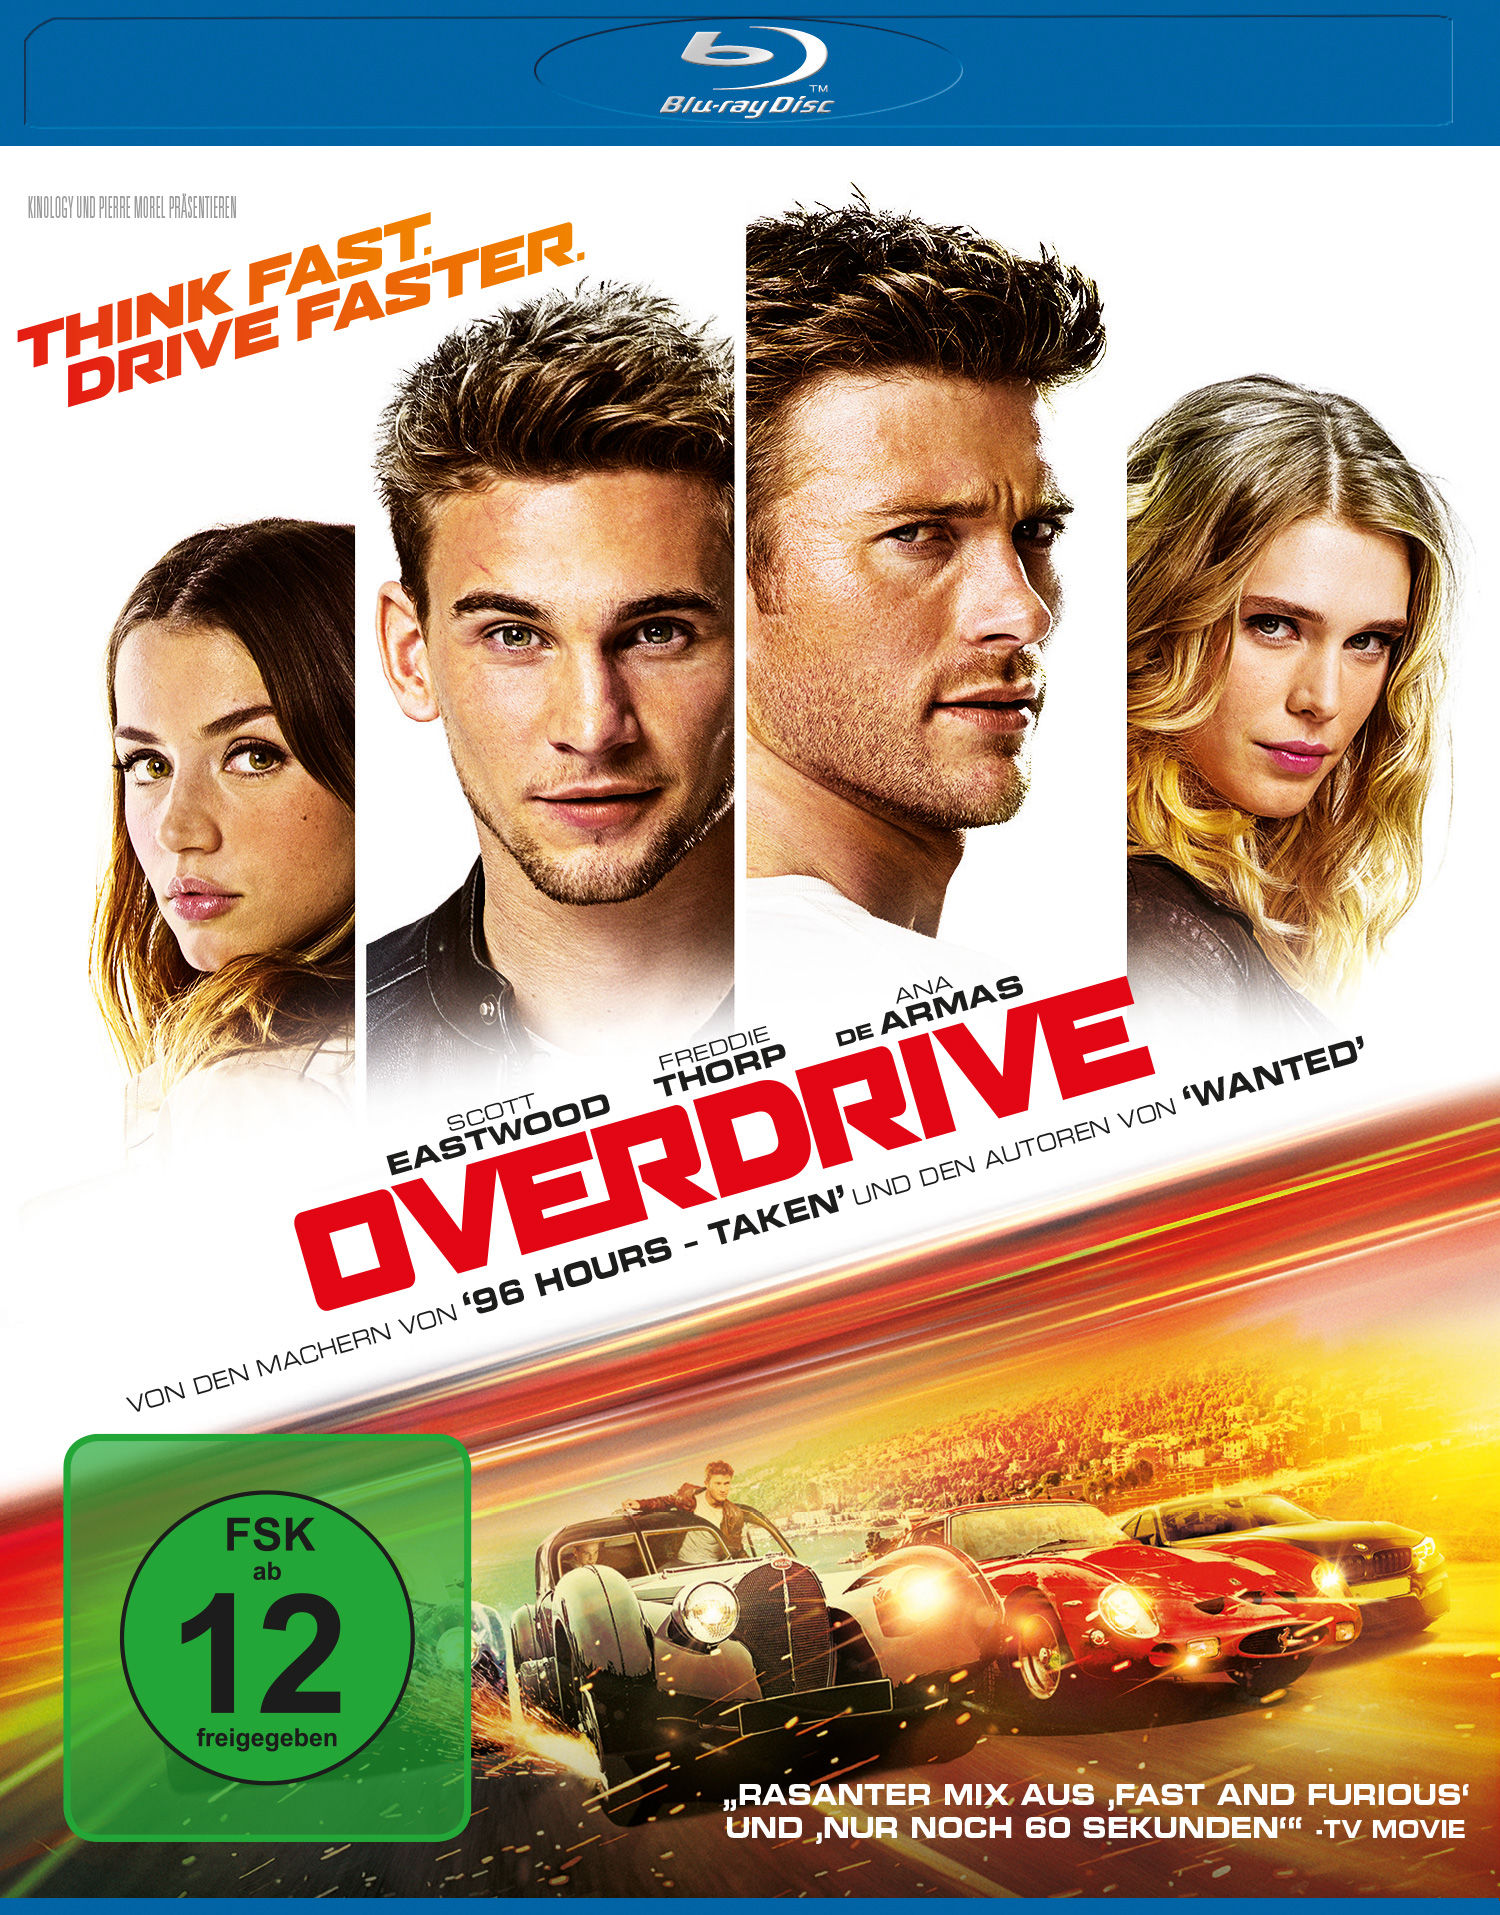 Overdrive – Think Fast, Drive Faster (Blu-ray – Film)